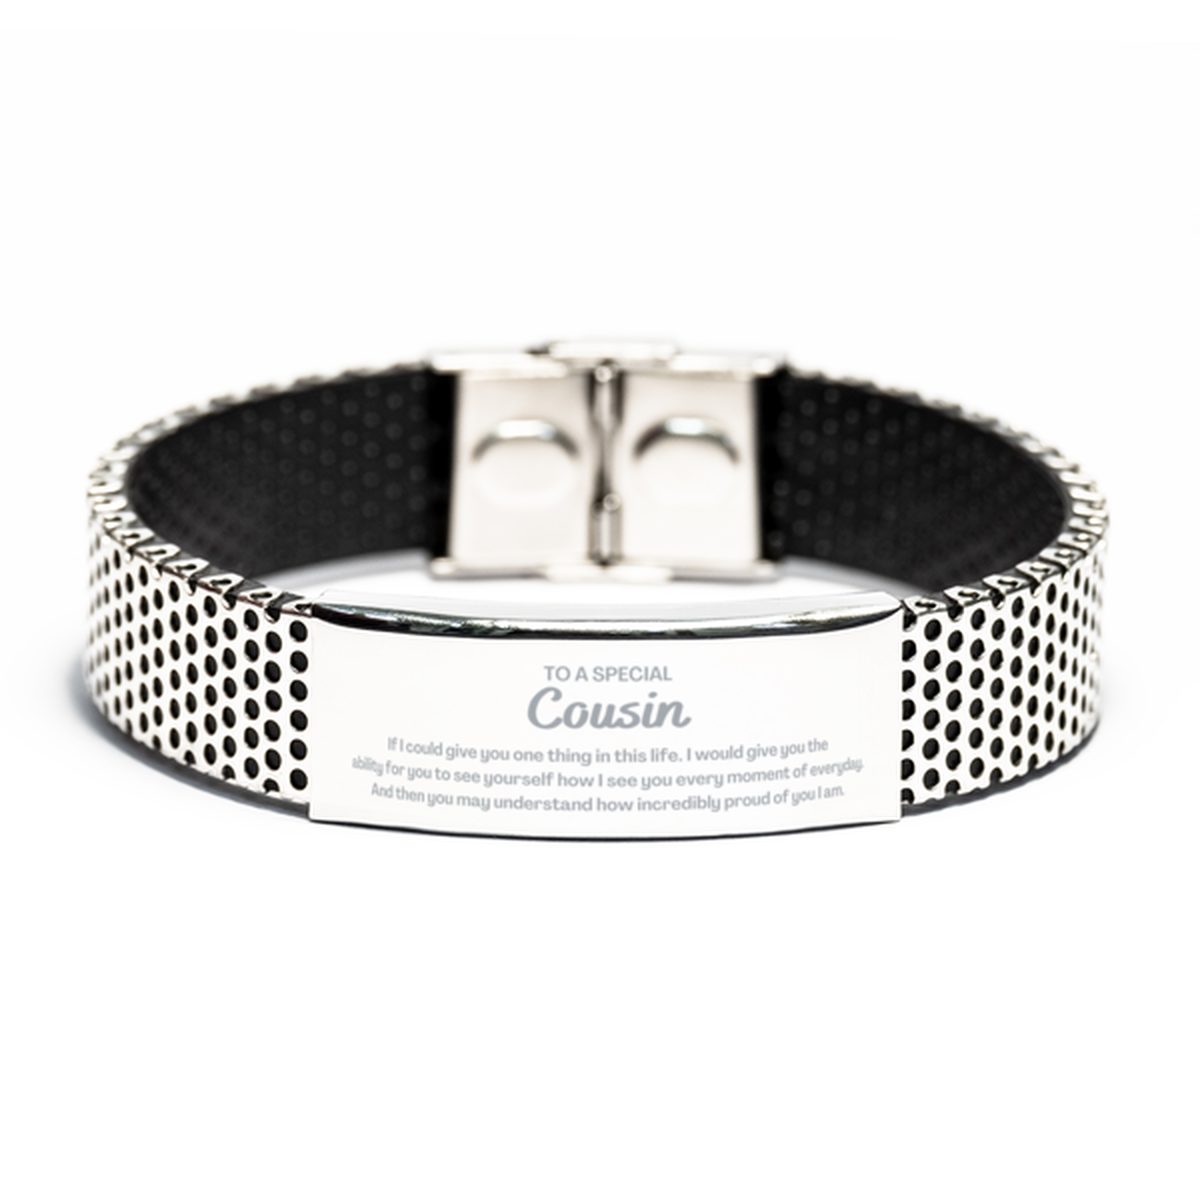 To My Cousin Stainless Steel Bracelet, Gifts For Cousin Engraved, Inspirational Gifts for Christmas Birthday, Epic Gifts for Cousin To A Special Cousin how incredibly proud of you I am